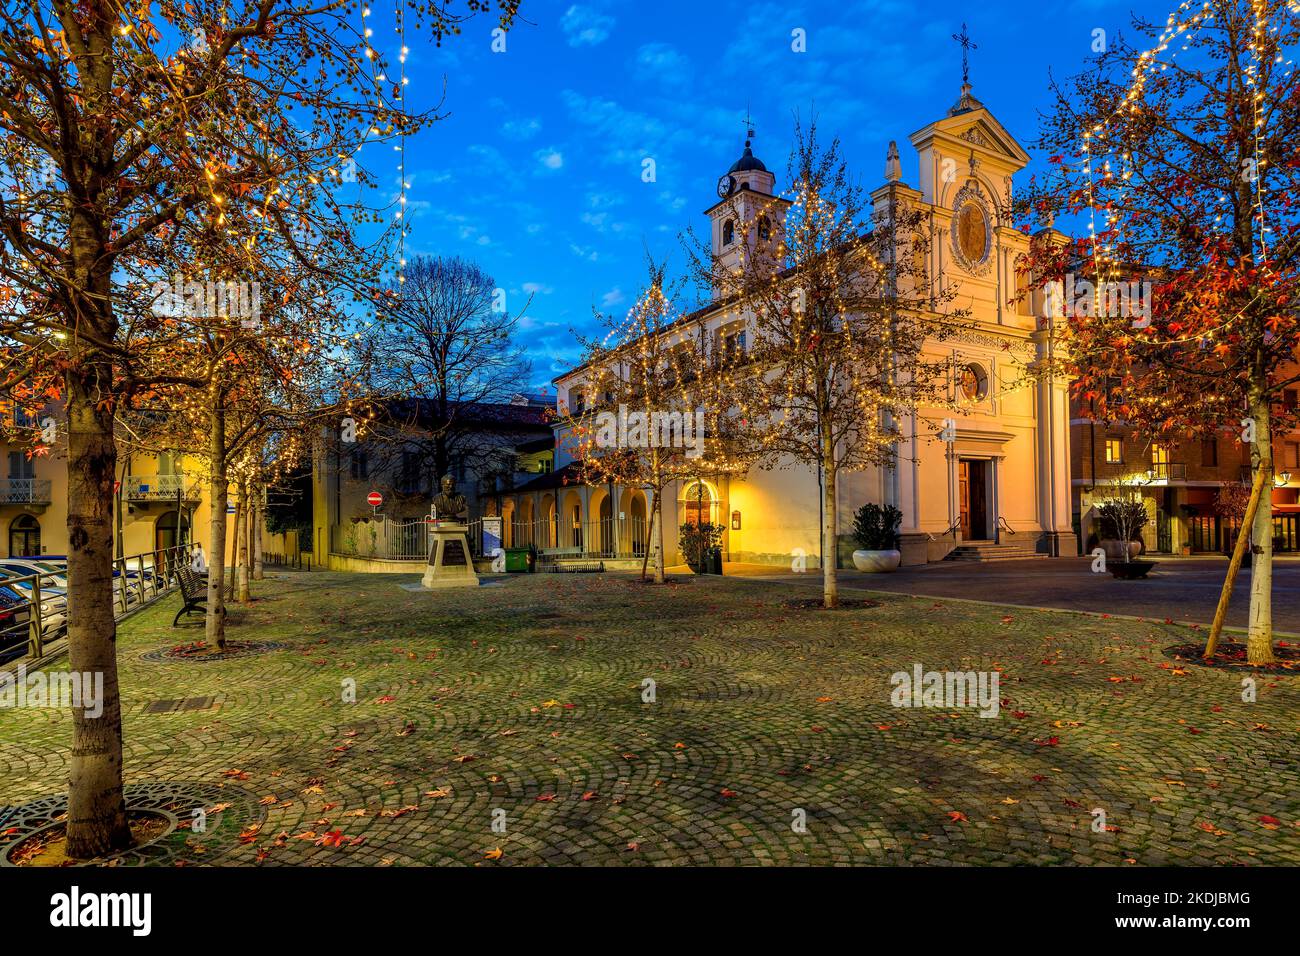 Catholic church on cobblestone town square and trees illuminated with Christmas lights in Alba, Piedmont, Northern Italy. Stock Photo